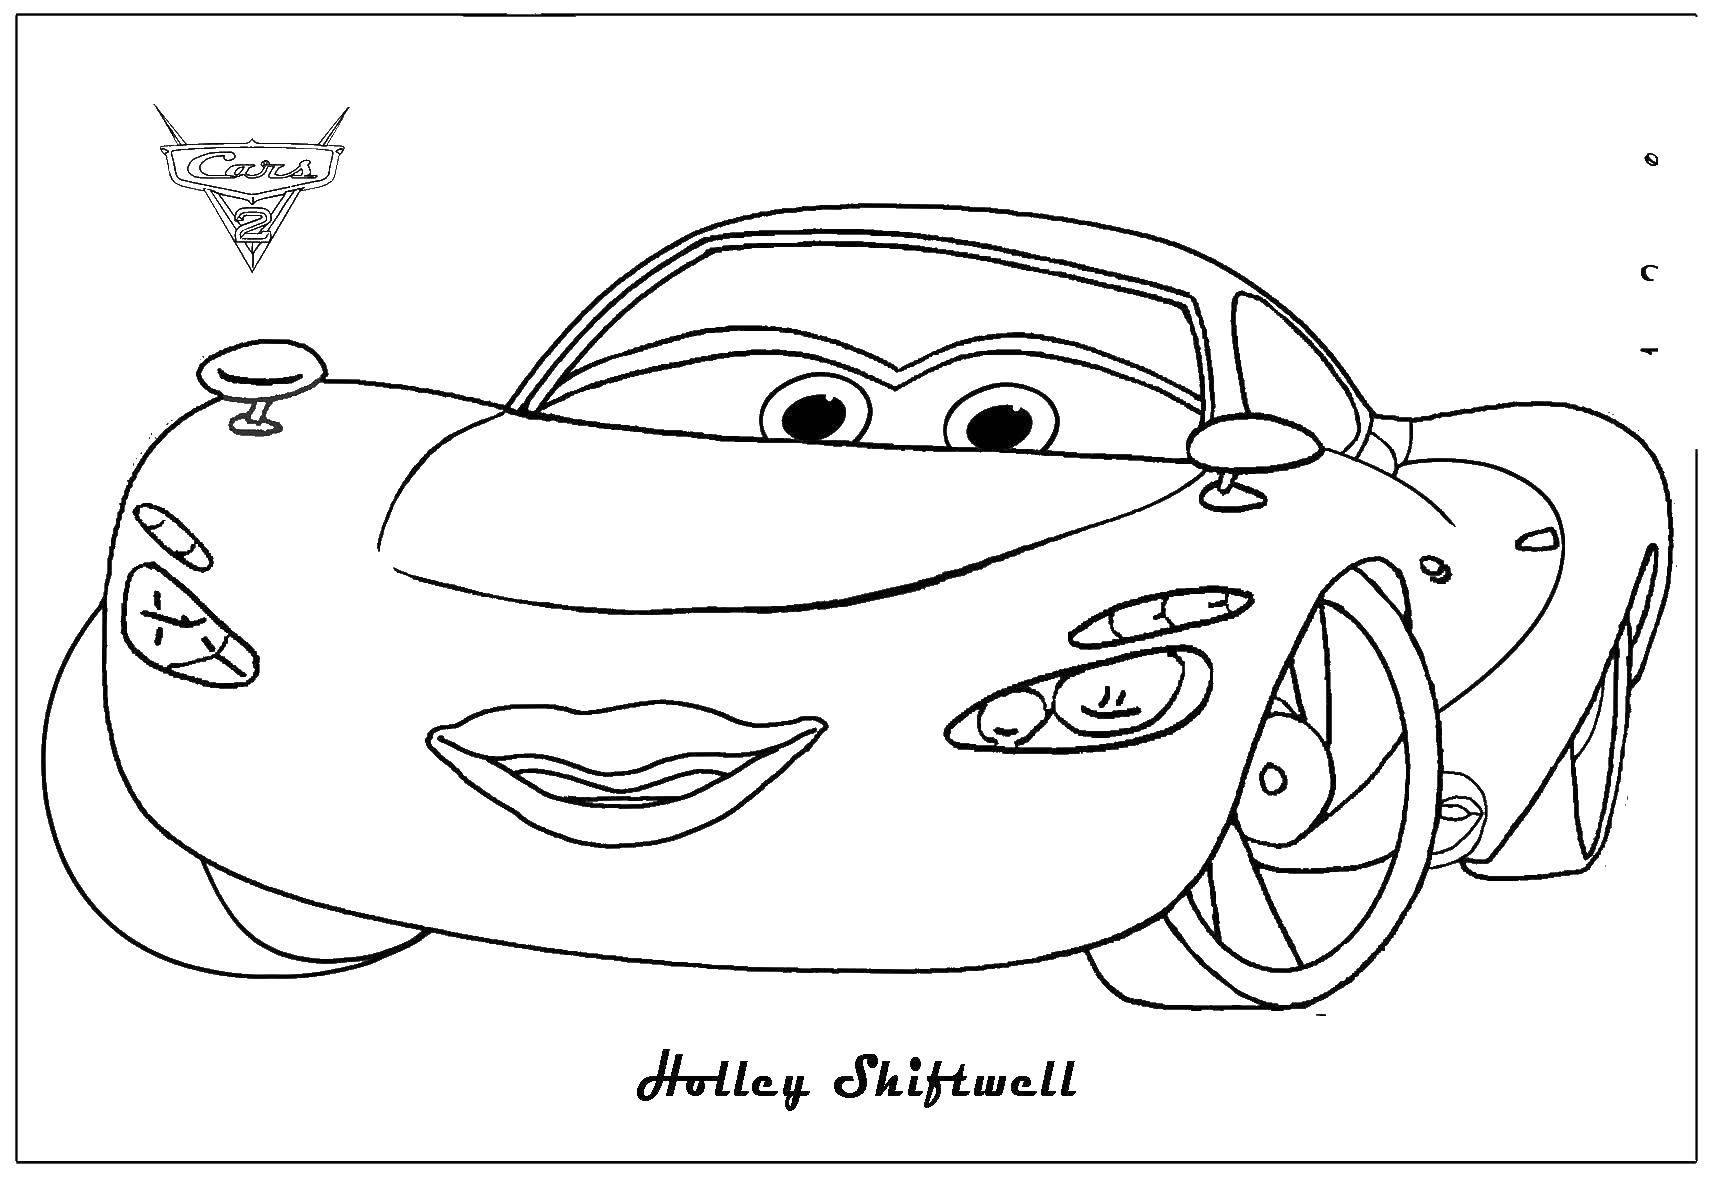 Coloring Holly Deluxe. Category Wheelbarrows. Tags:  Holly shiftwell, cars.